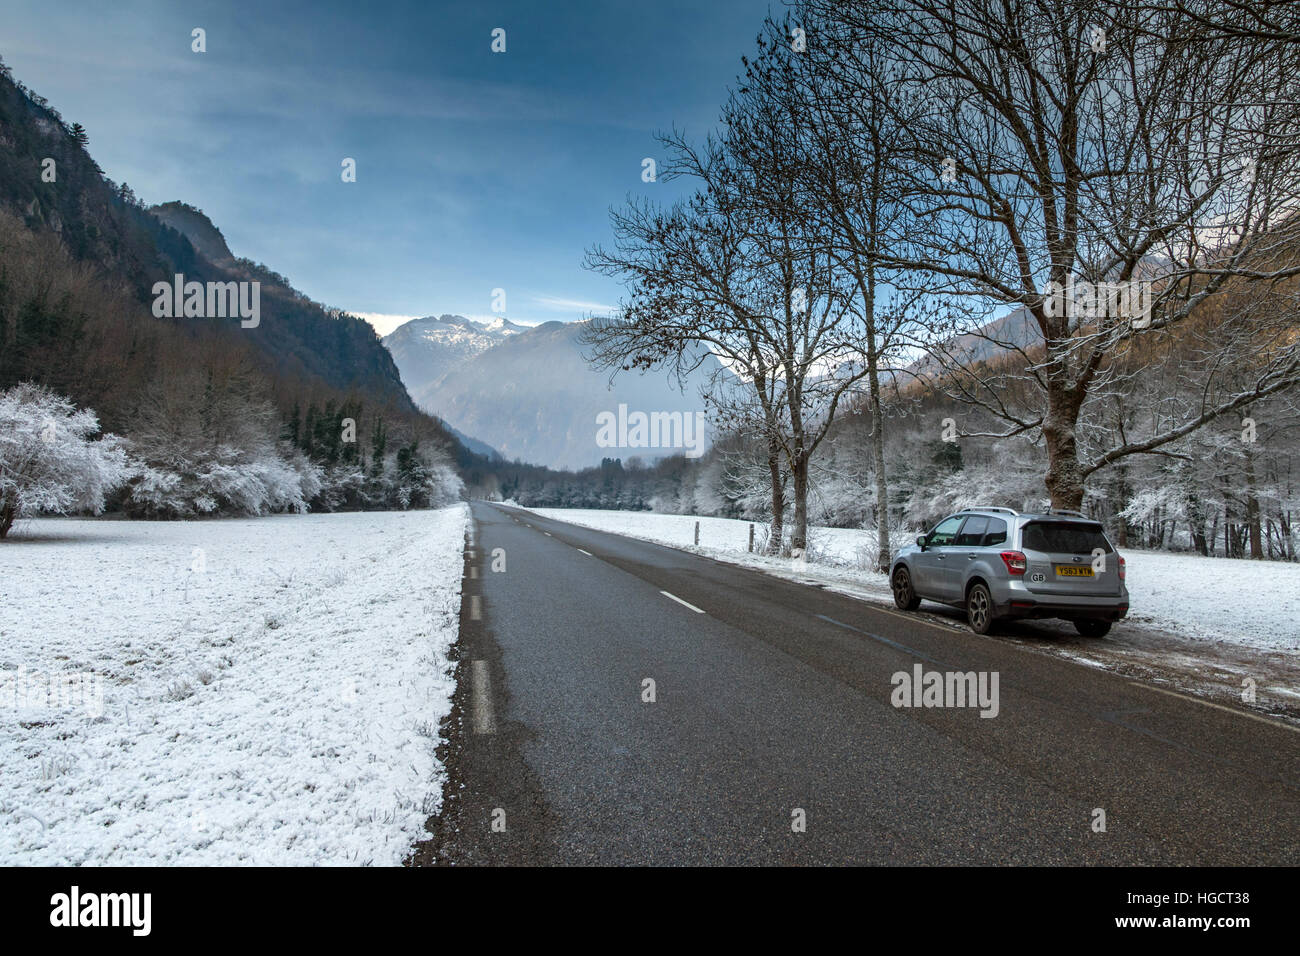 Road running through snowy landscape towards mountains with parked 4x4 car, Stock Photo